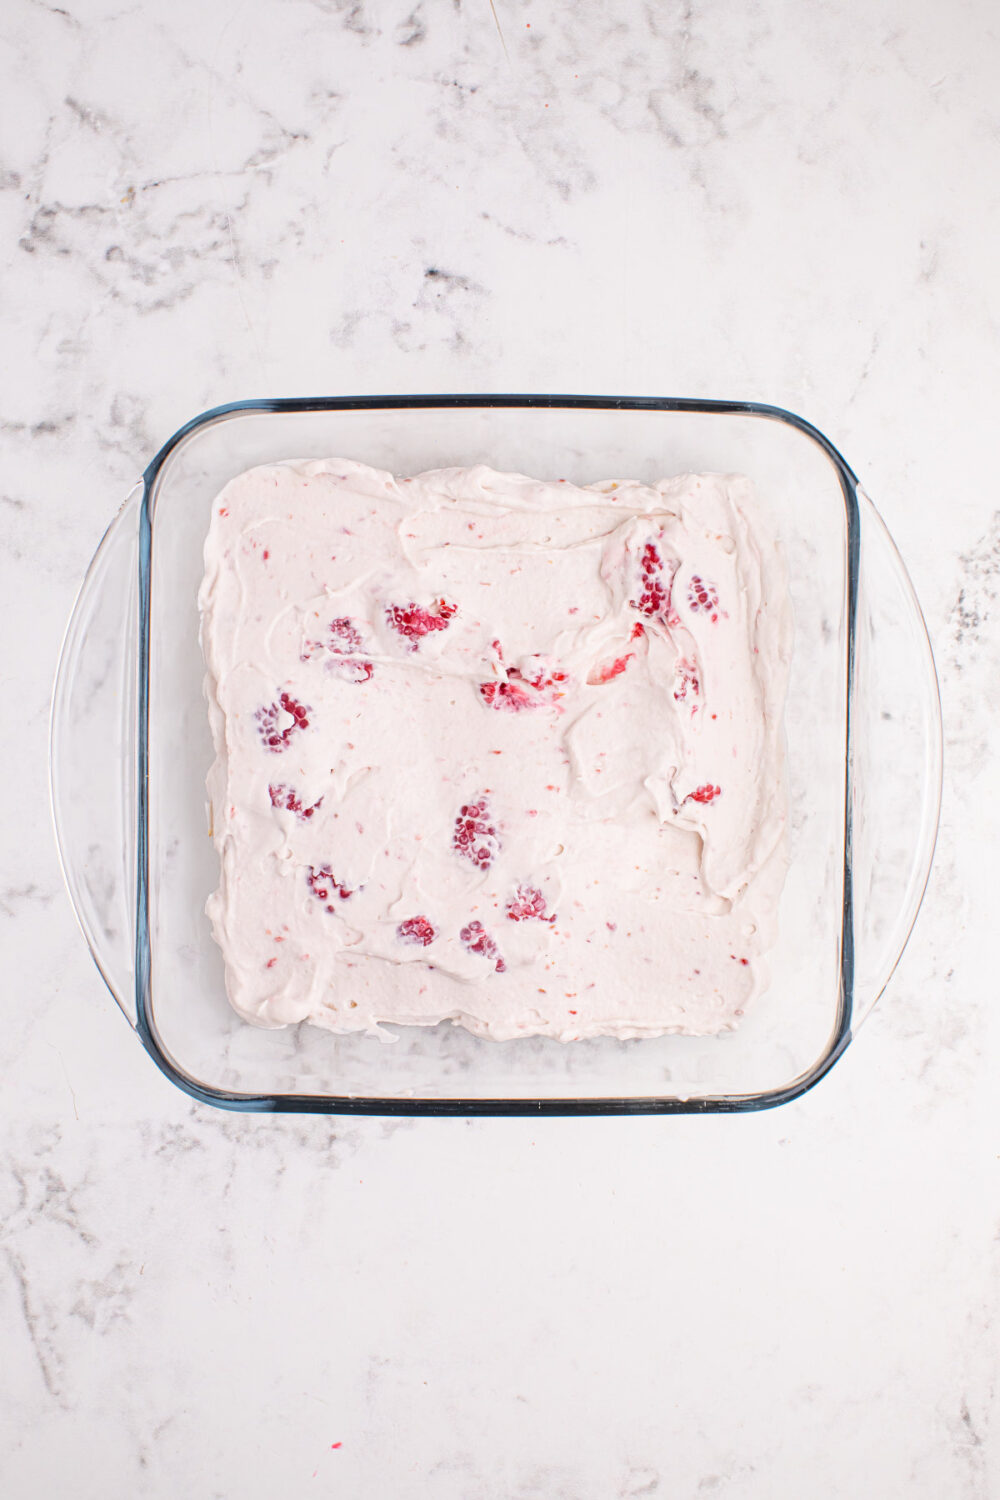 Raspberry whipped cream in a glass dish. 